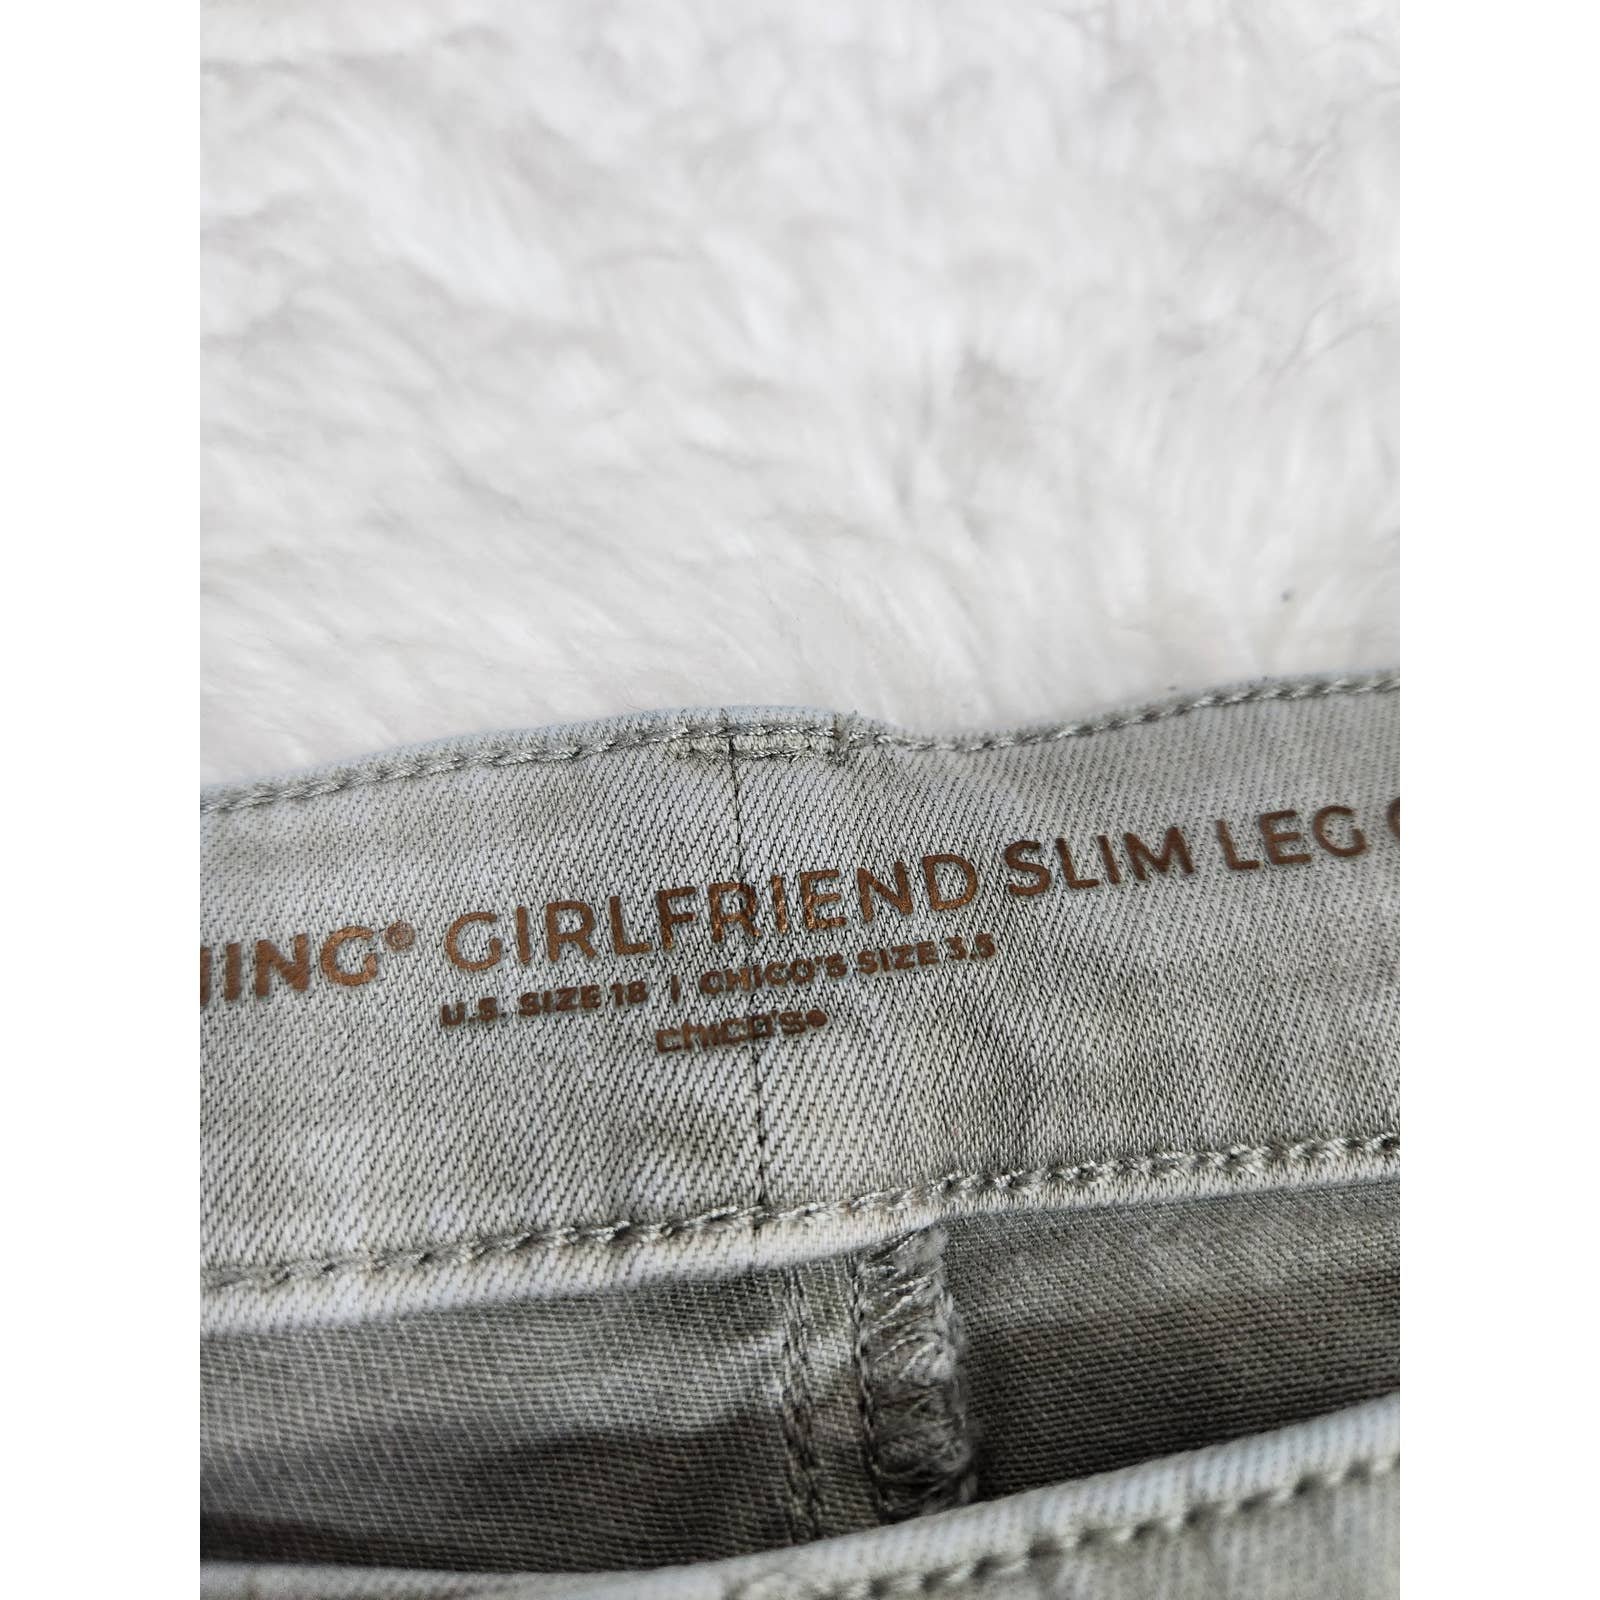 Personality Chico´s Womens Jeans So Slimming Girlfriend Slim Leg Crop Hi-Rise Gray Wash 18 oWMCApMIX Store Online